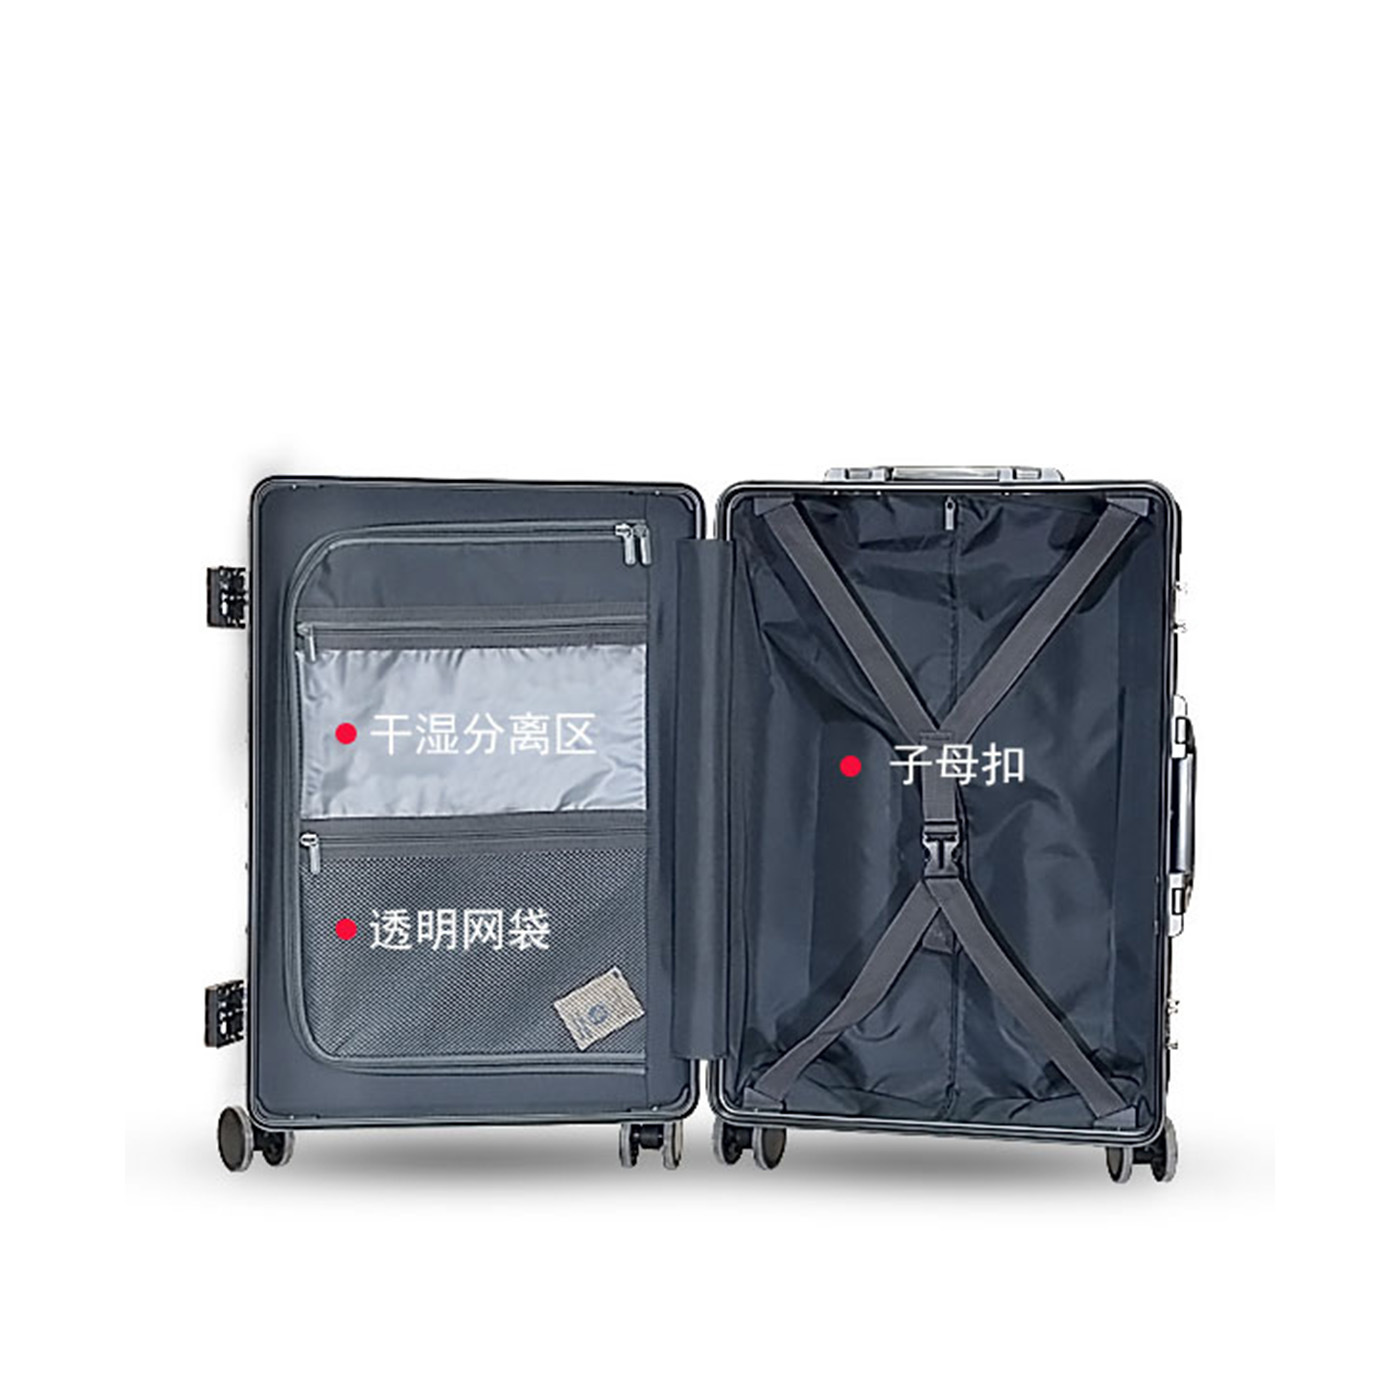 Front Open Luggage Multi-Functional Aluminum Frame Password Trolley Case Rechargeable with Cup Holder Suitcase 20-Inch Boarding Bag